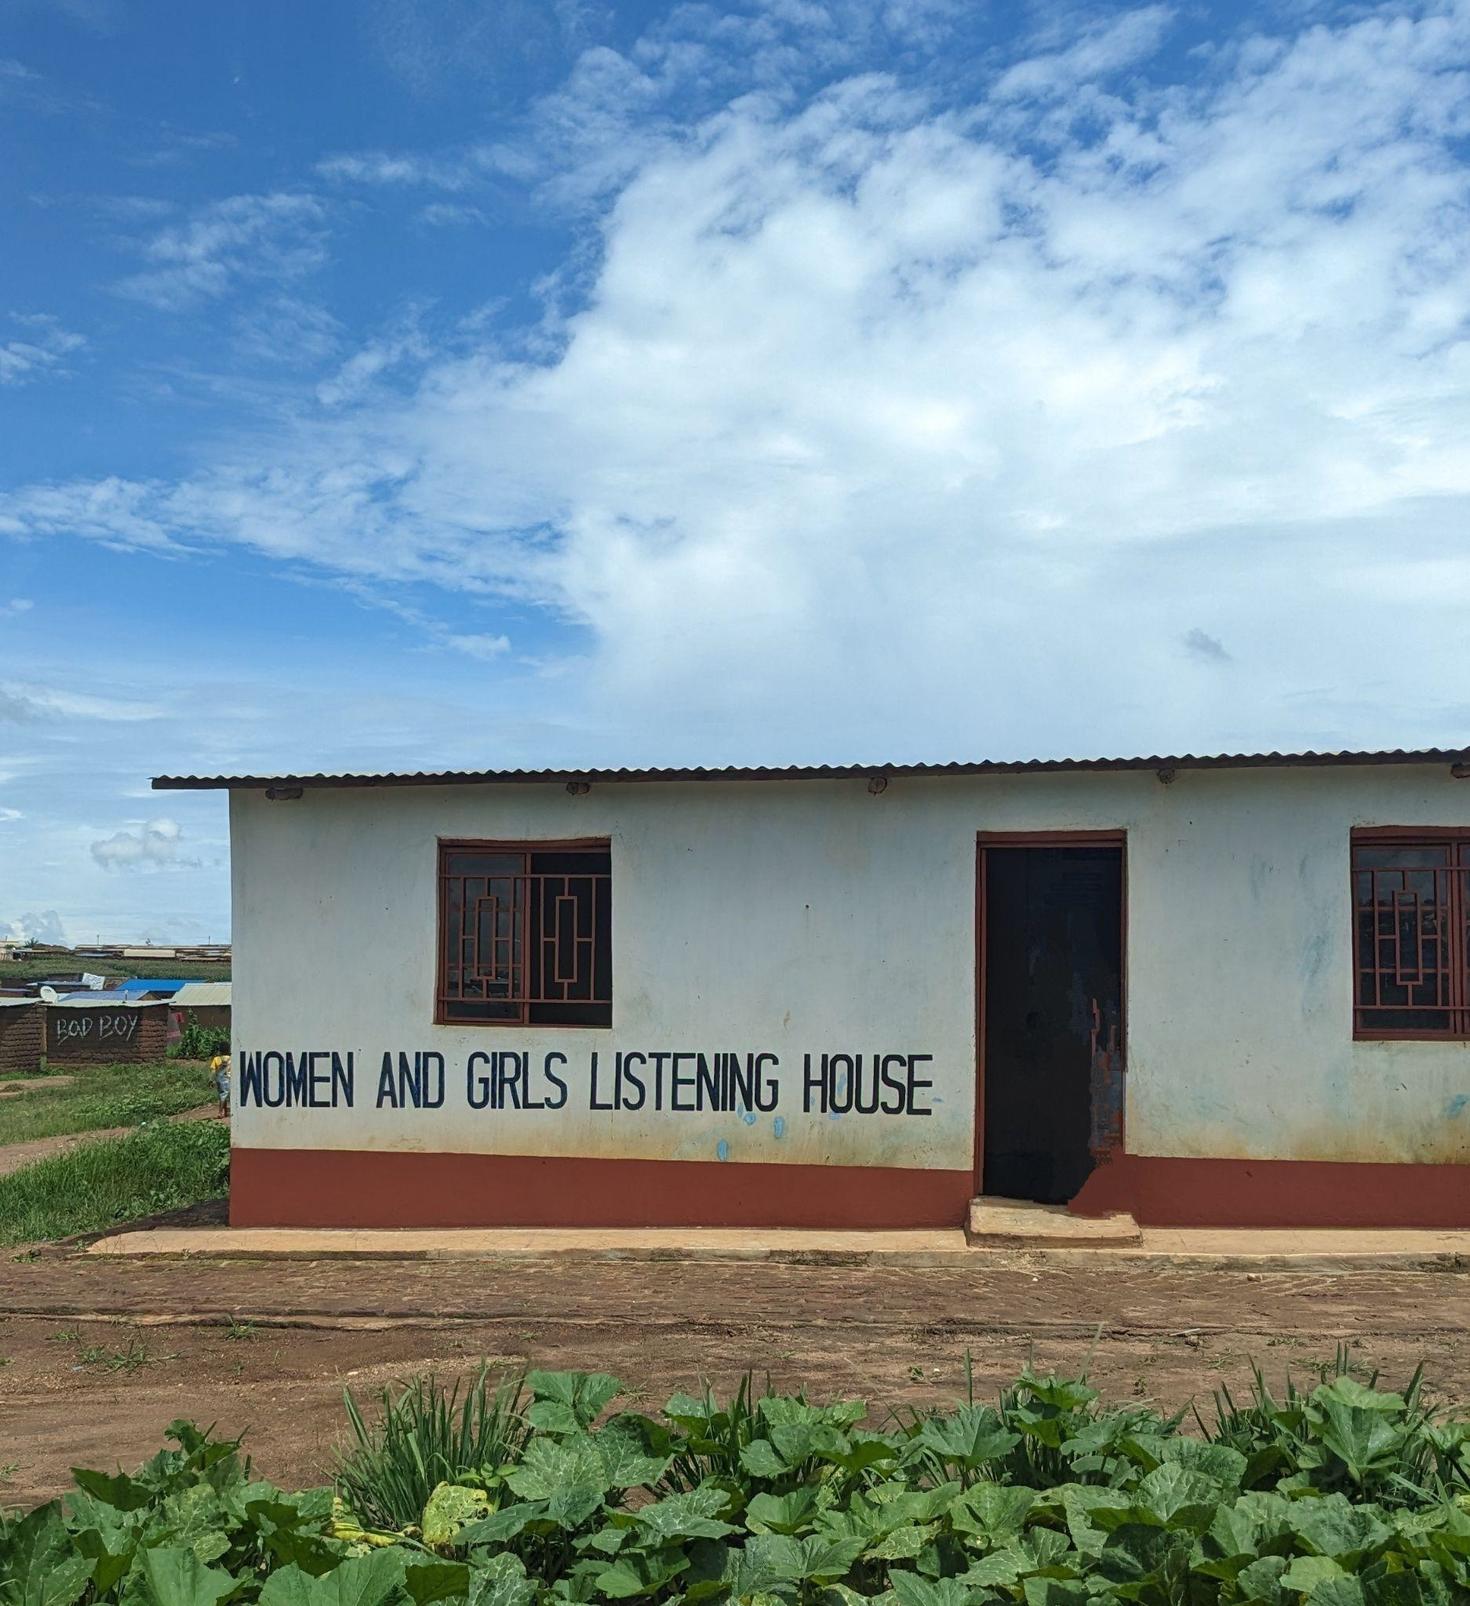 Small building in the middle of a field. White and orange walls with written "Women and girls listening house" on a wall. Blue sky in the background